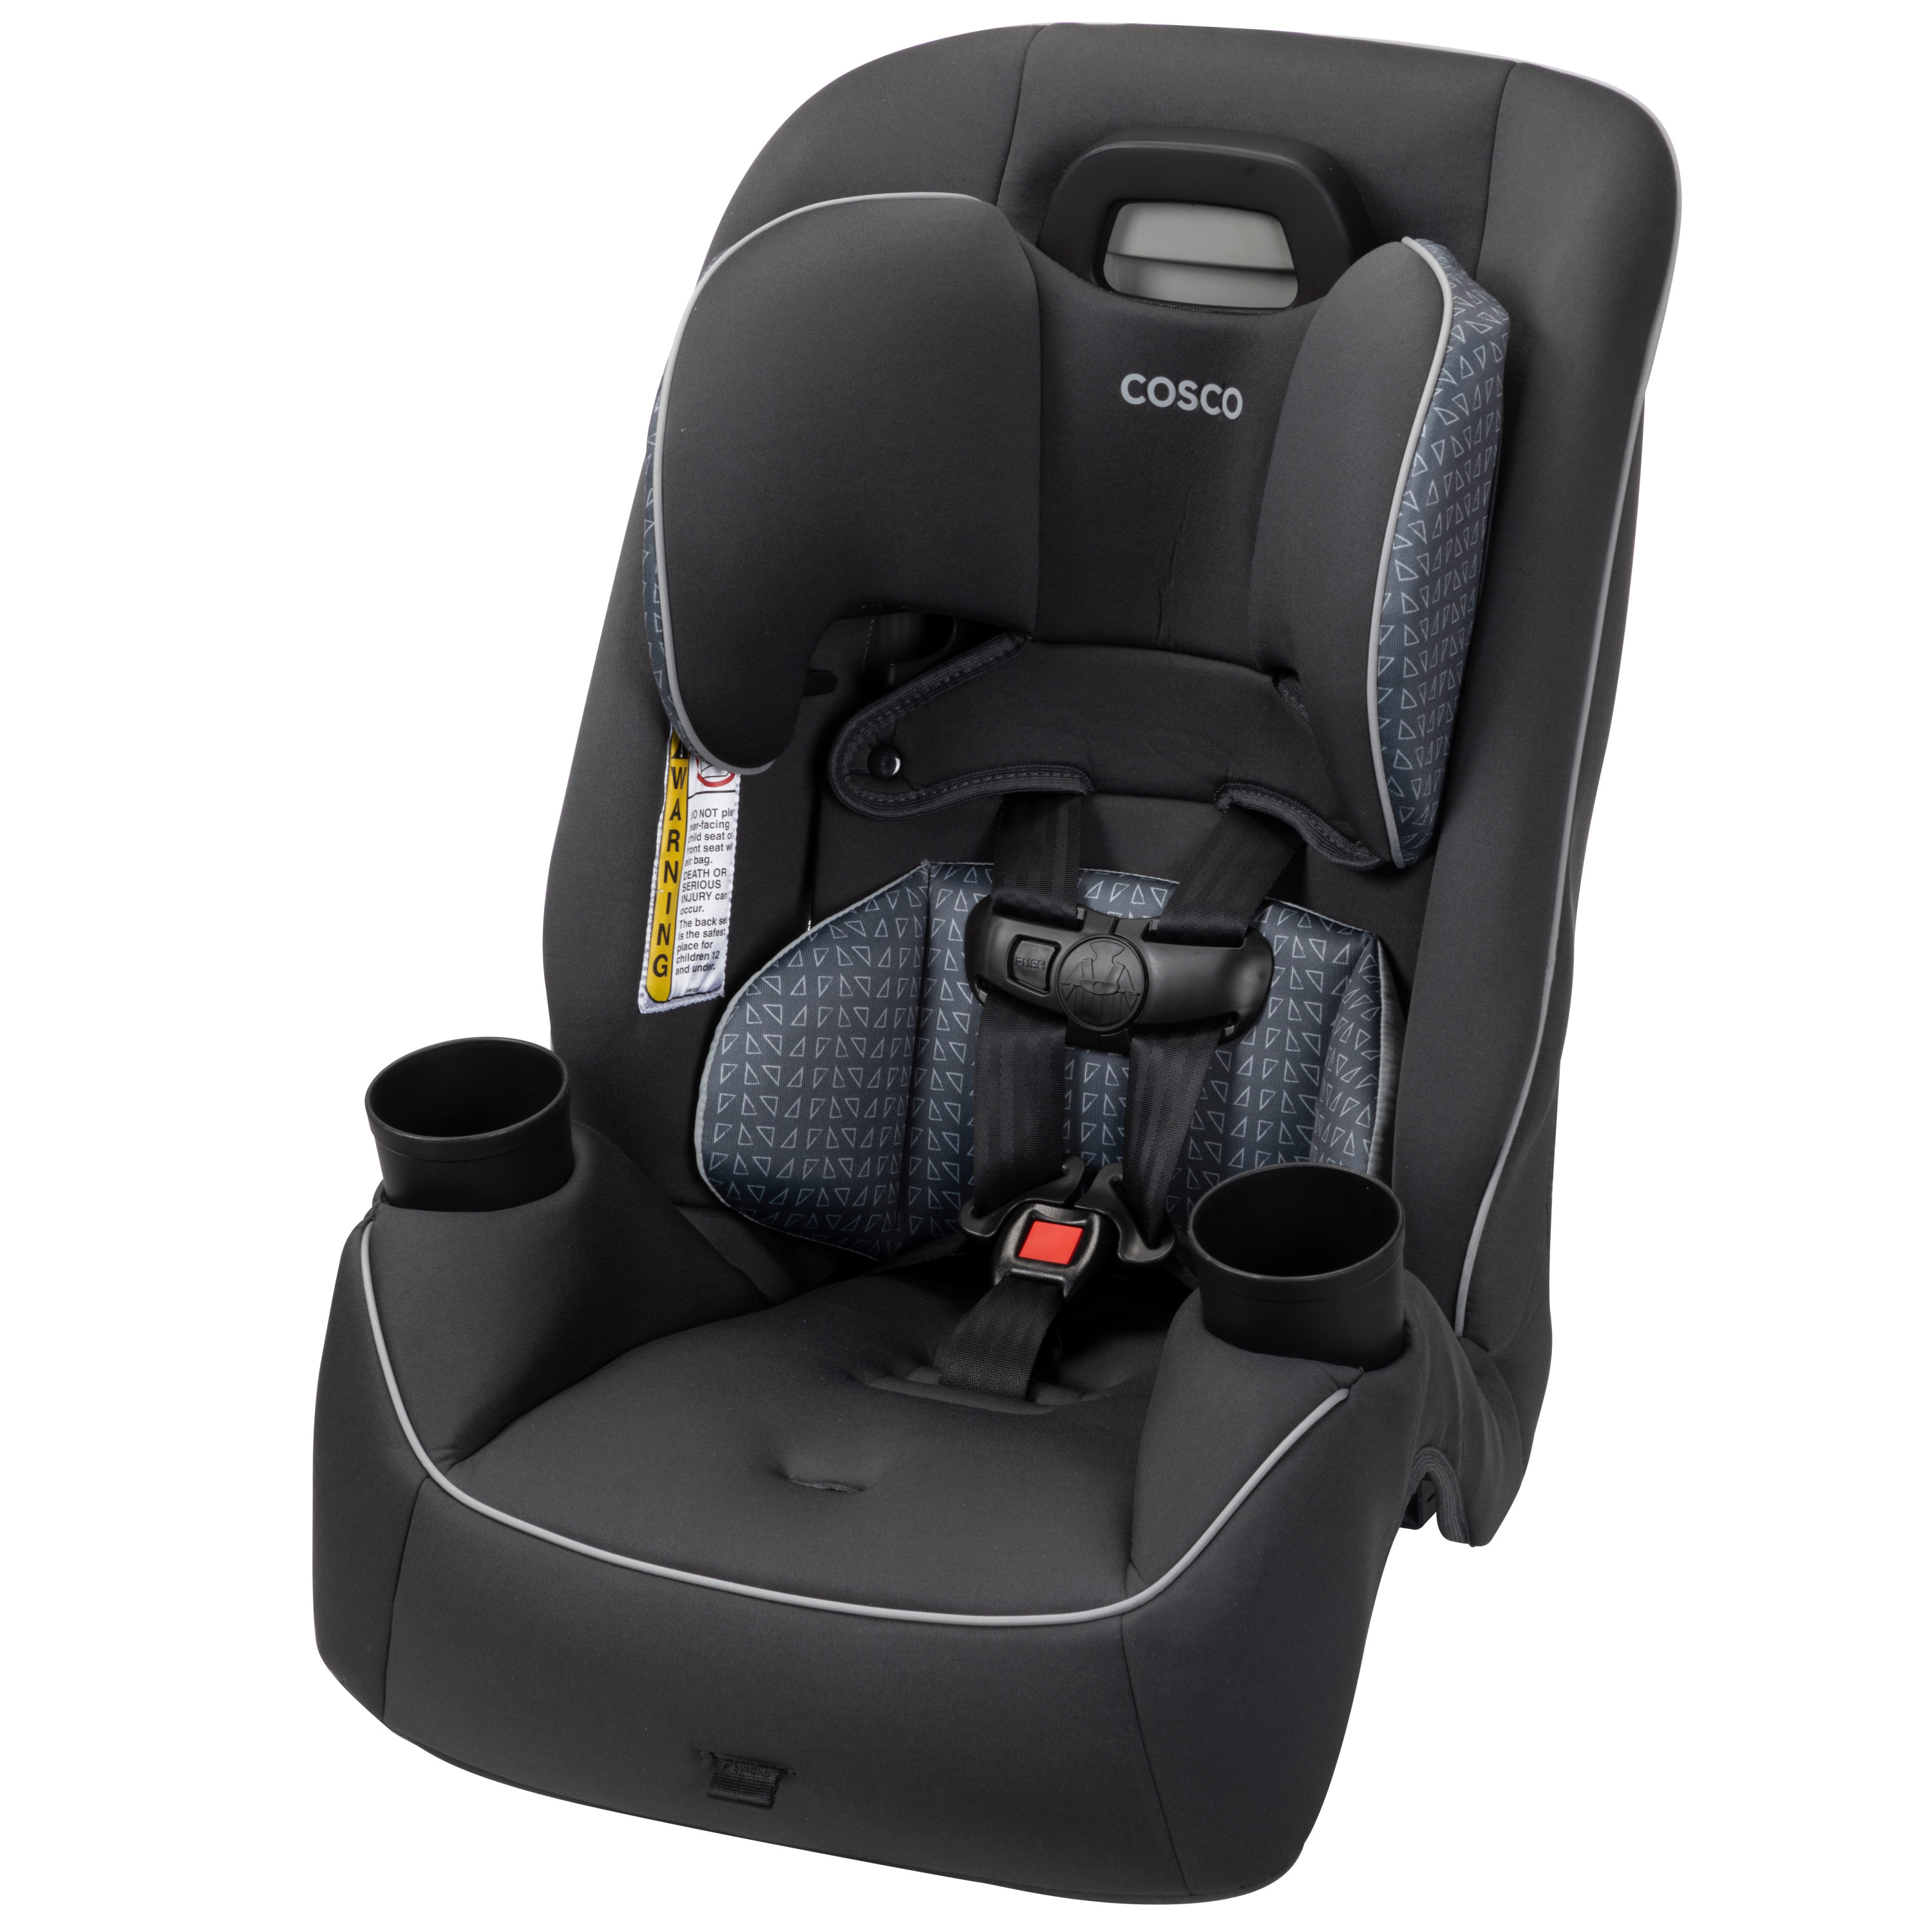 Cosco Kids Easy Elite Slim All-in-One Convertible Car Seat, Grey Glyphs - image 1 of 29